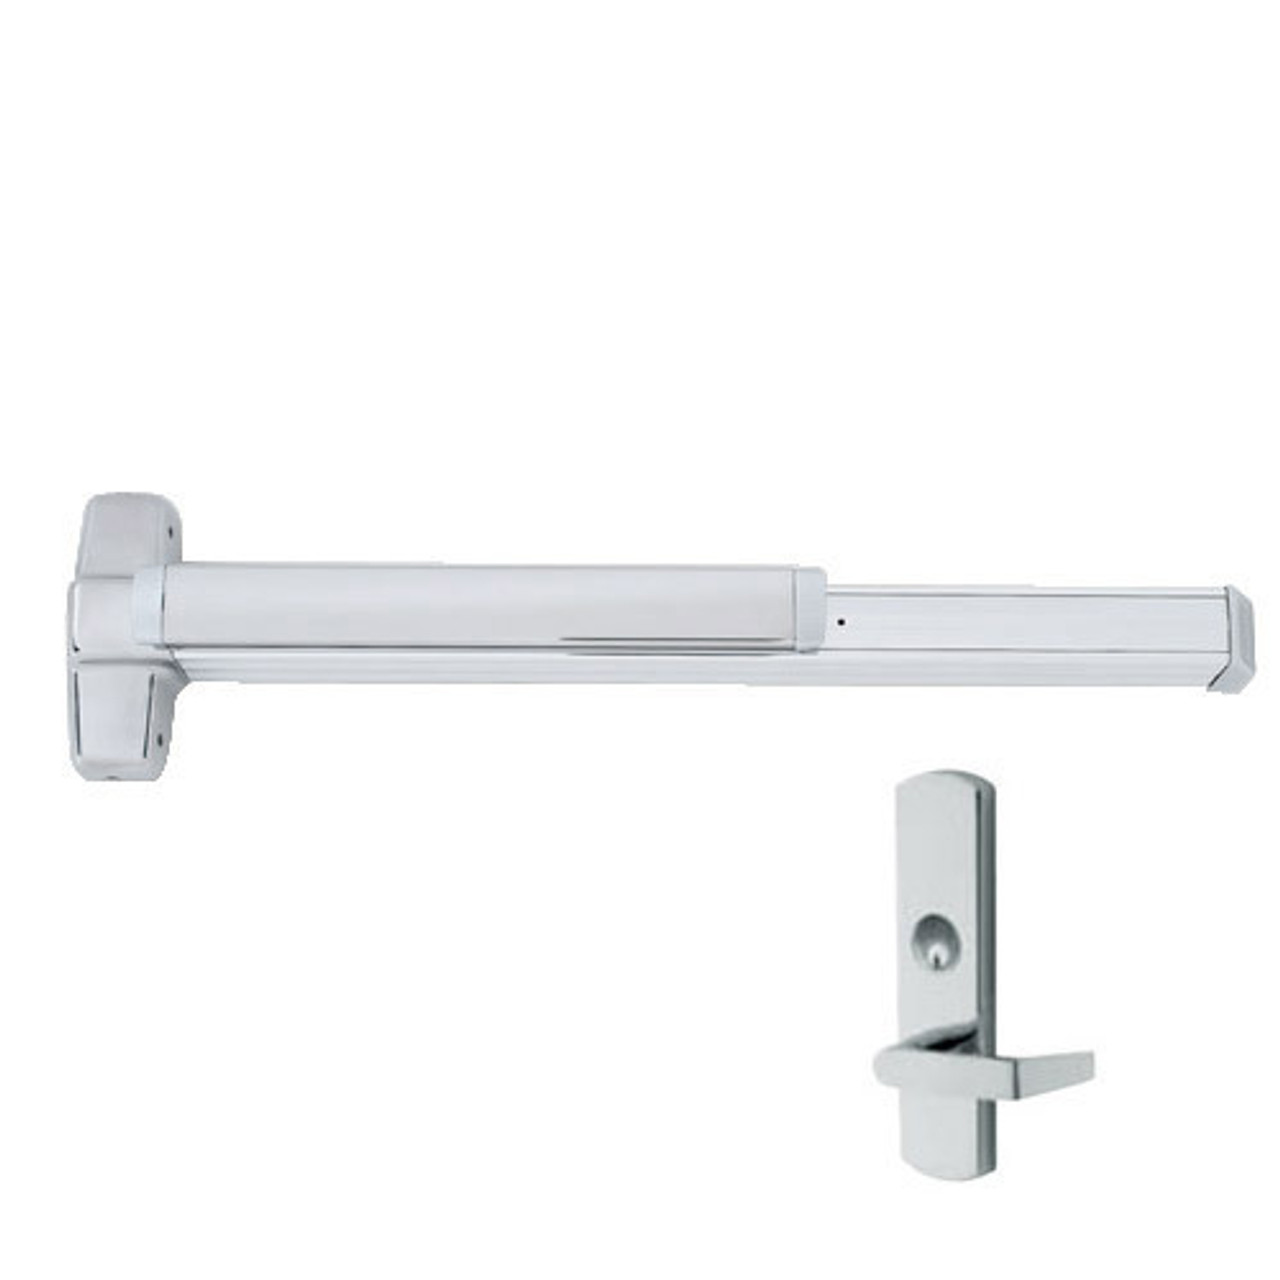 CD9847WDC-L-US28-4-LHR Von Duprin Exit Device with Cylinder Dogging in Anodized Aluminum